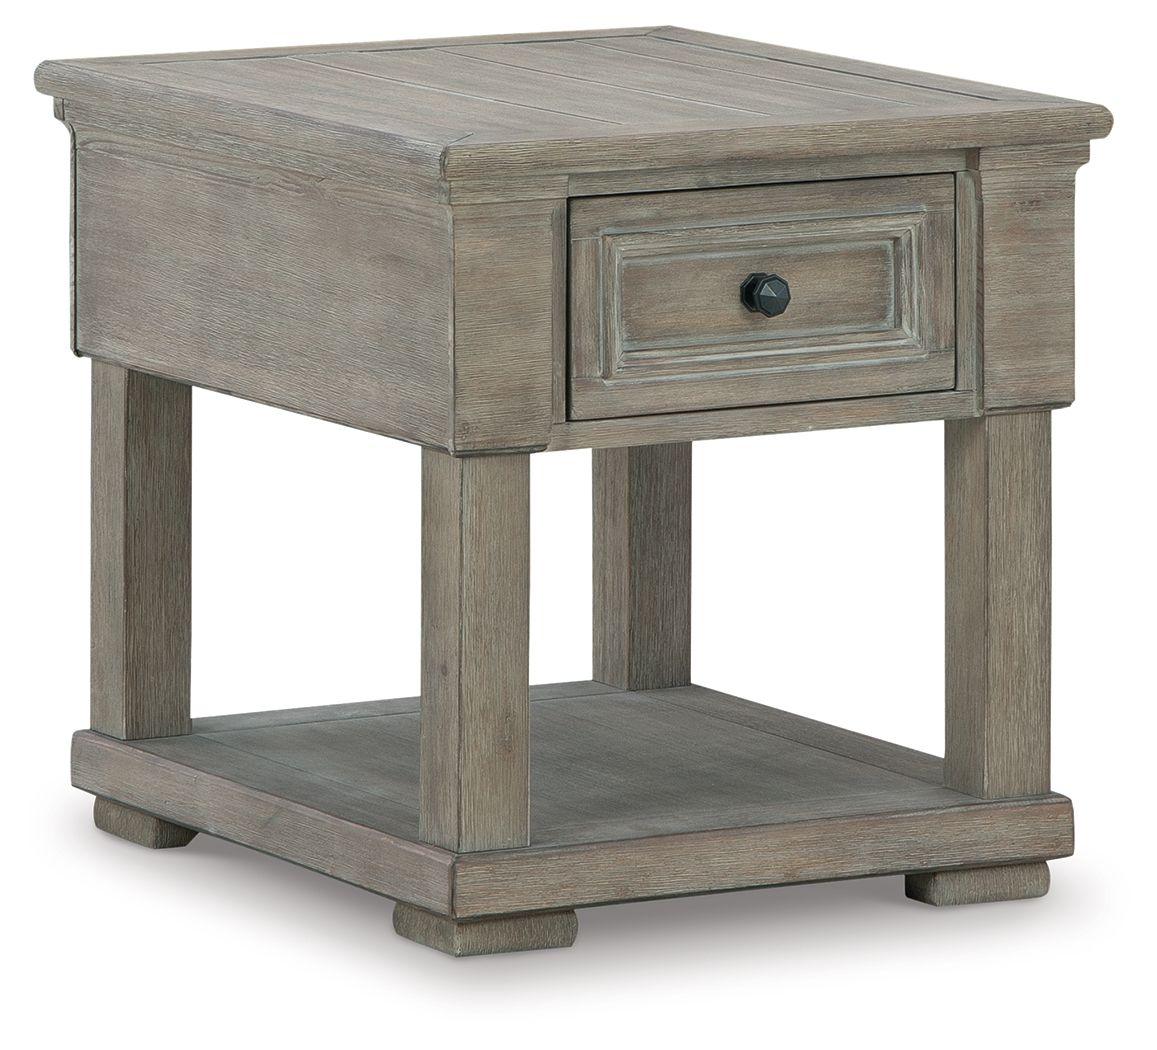 Ashley Furniture - Moreshire - Bisque - Rectangular End Table - 5th Avenue Furniture